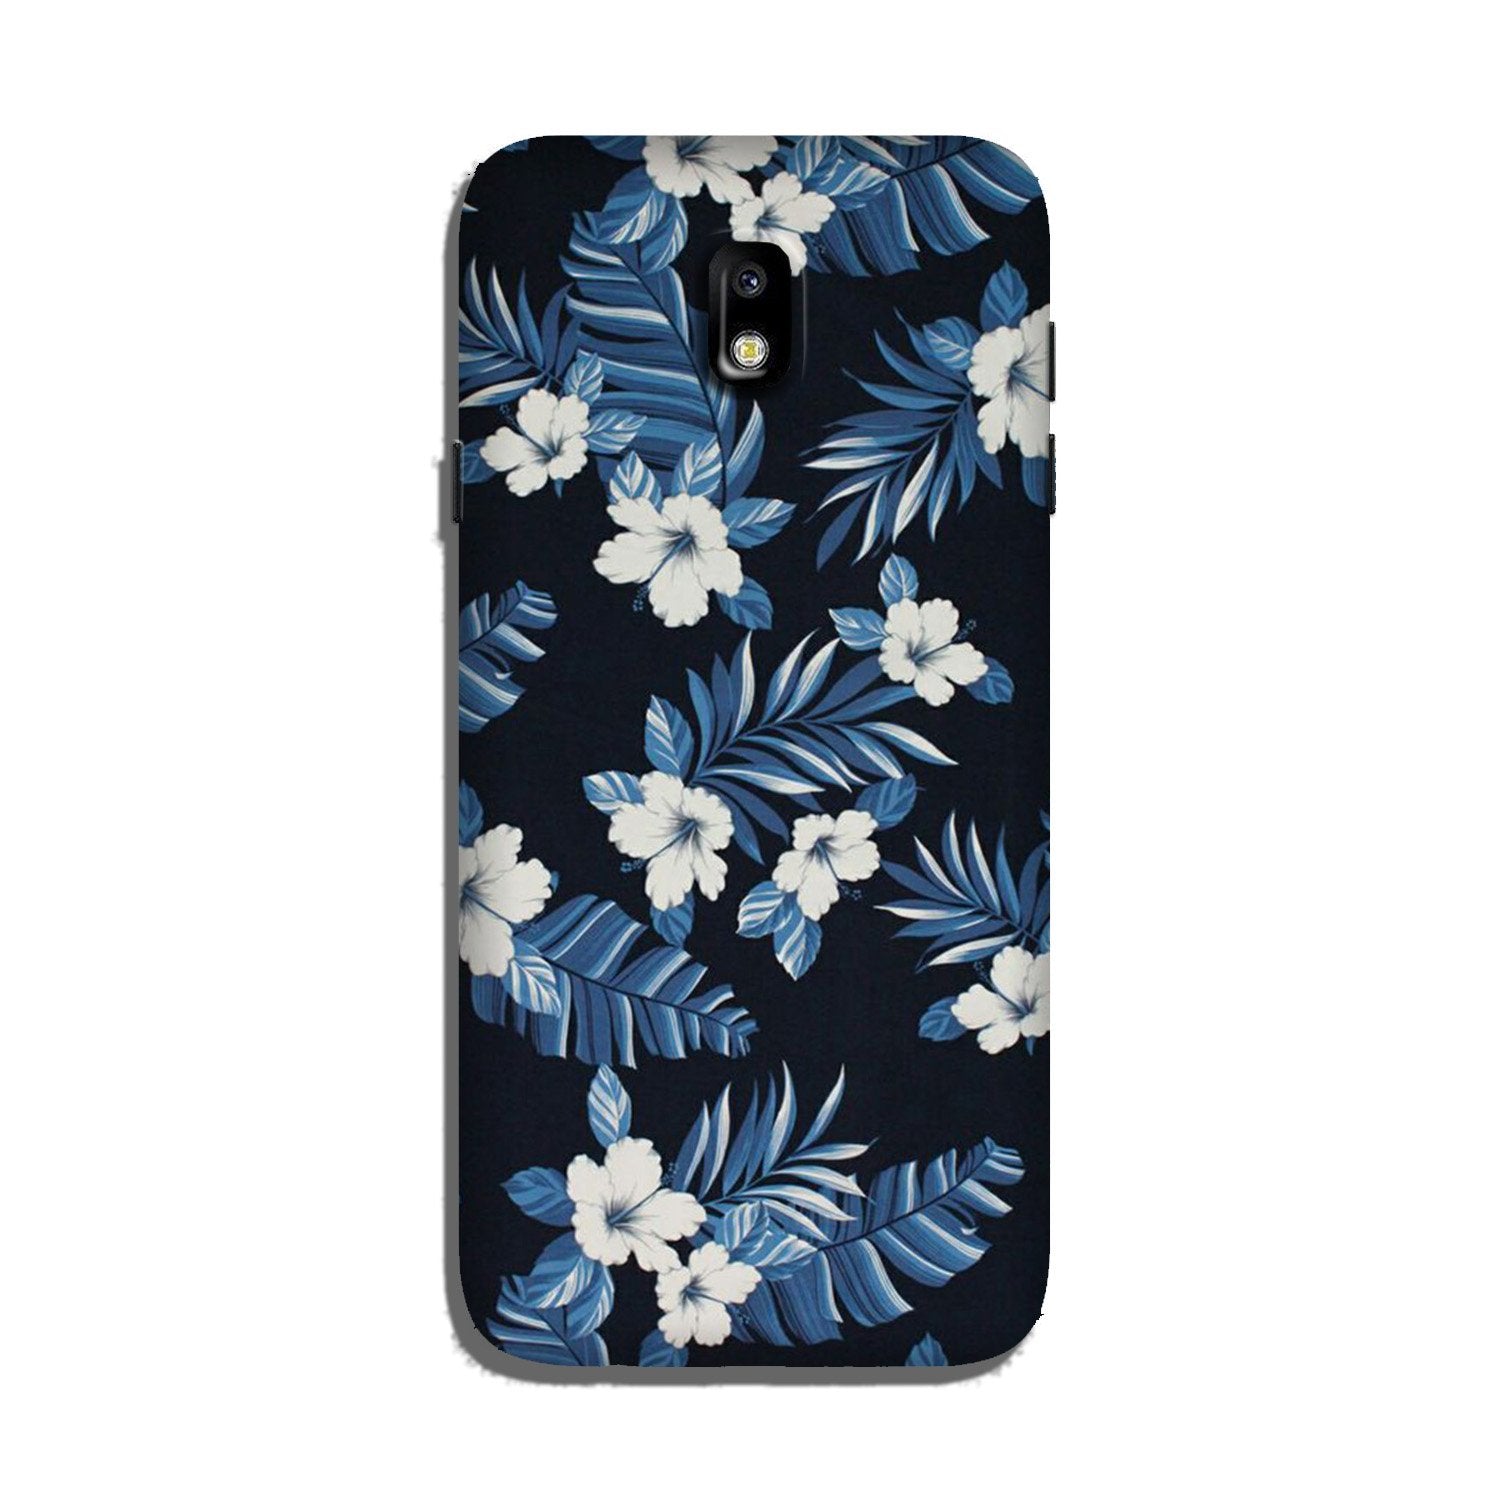 White flowers Blue Background2 Case for Galaxy J7 Pro